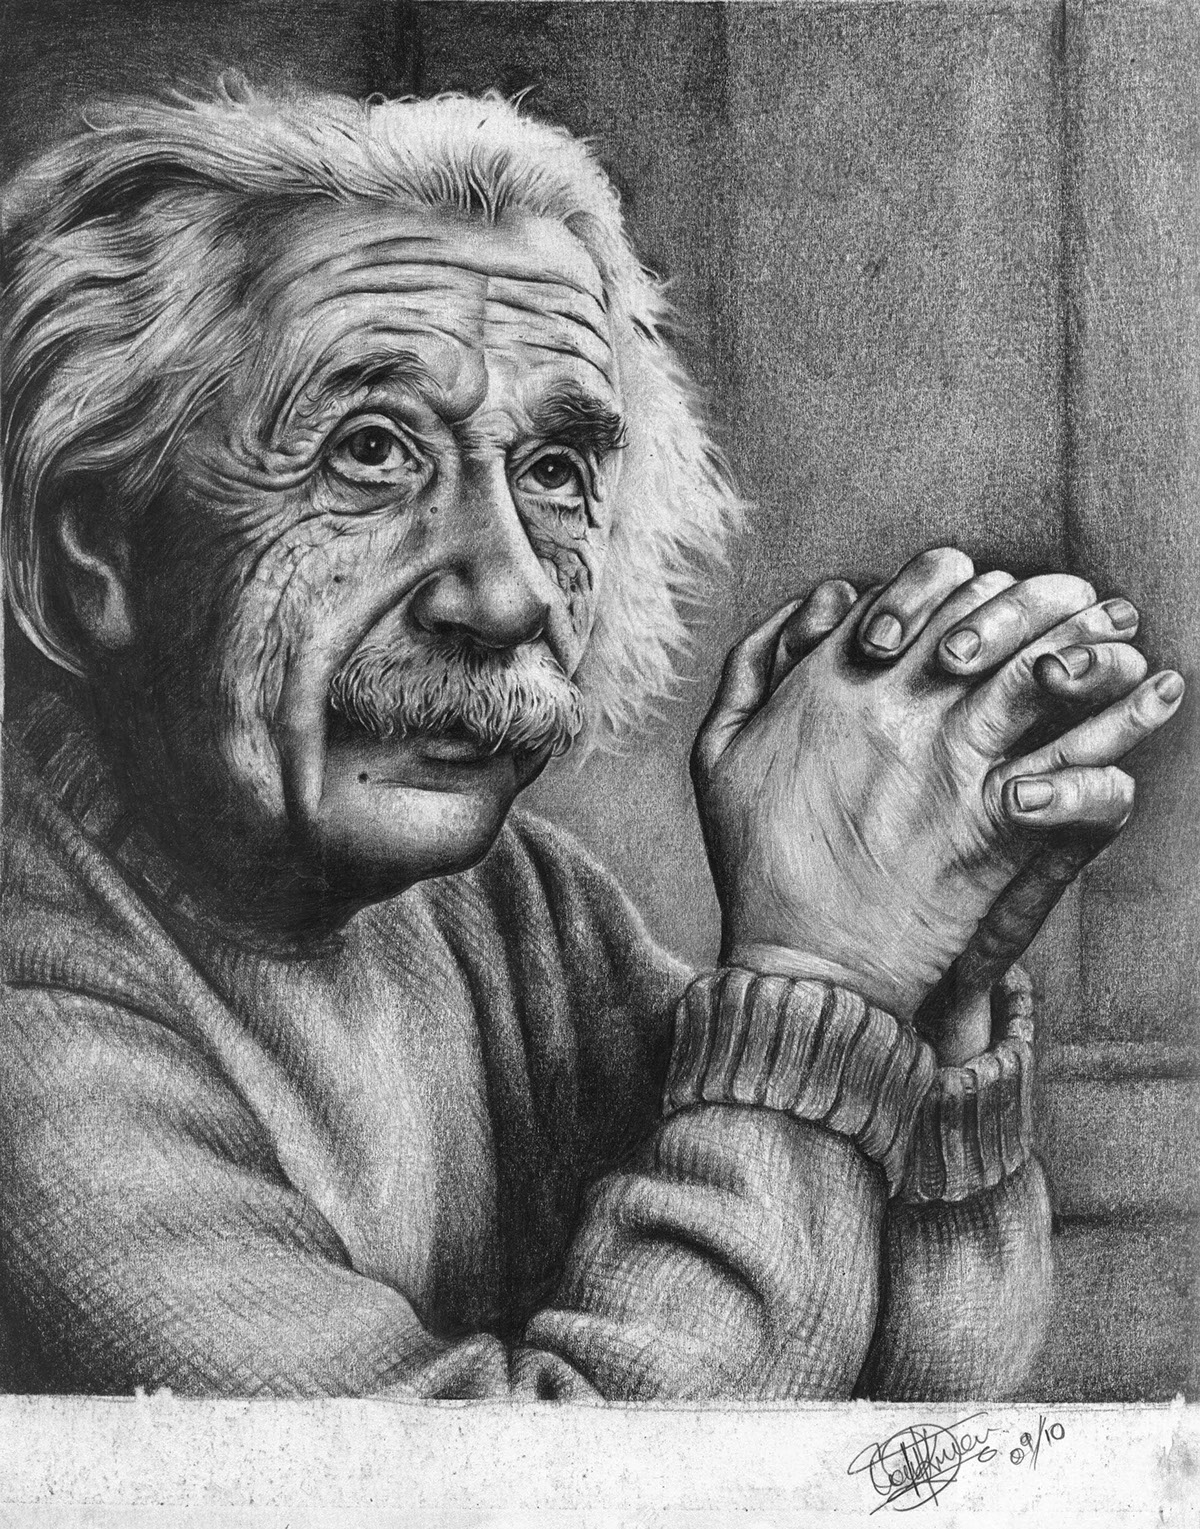 Who Is The Famous Pencil Sketch Artist 21 remarkable pencil portraits